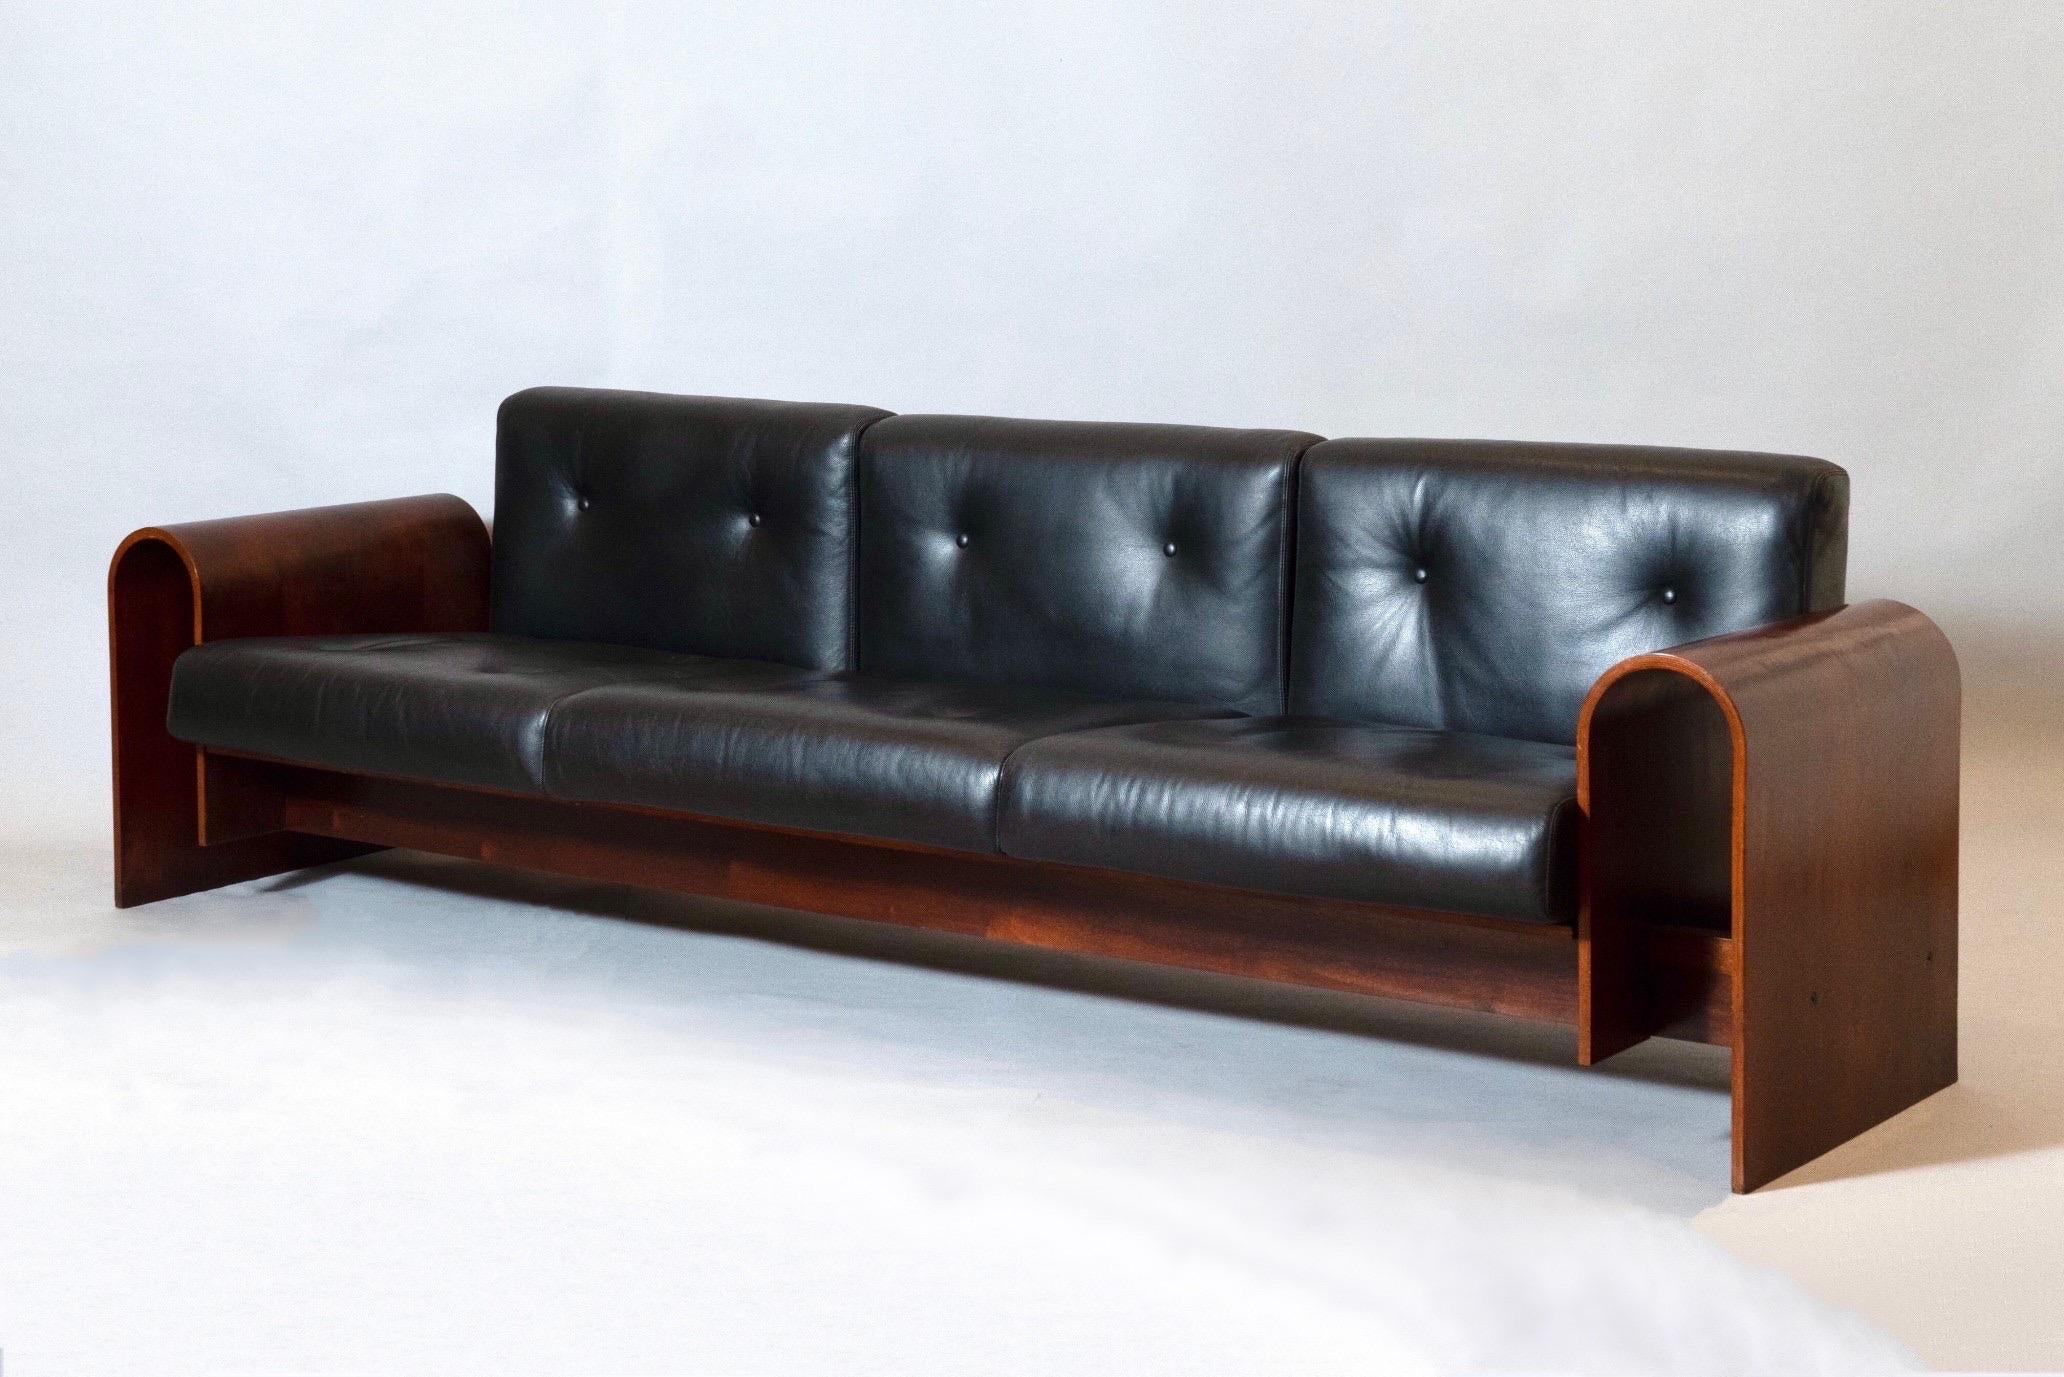 Oscar Niemeyer Exceptional Sofa in Rosewood and Leather, Hotel SESC, Brazil 1990 In Good Condition For Sale In New York, NY